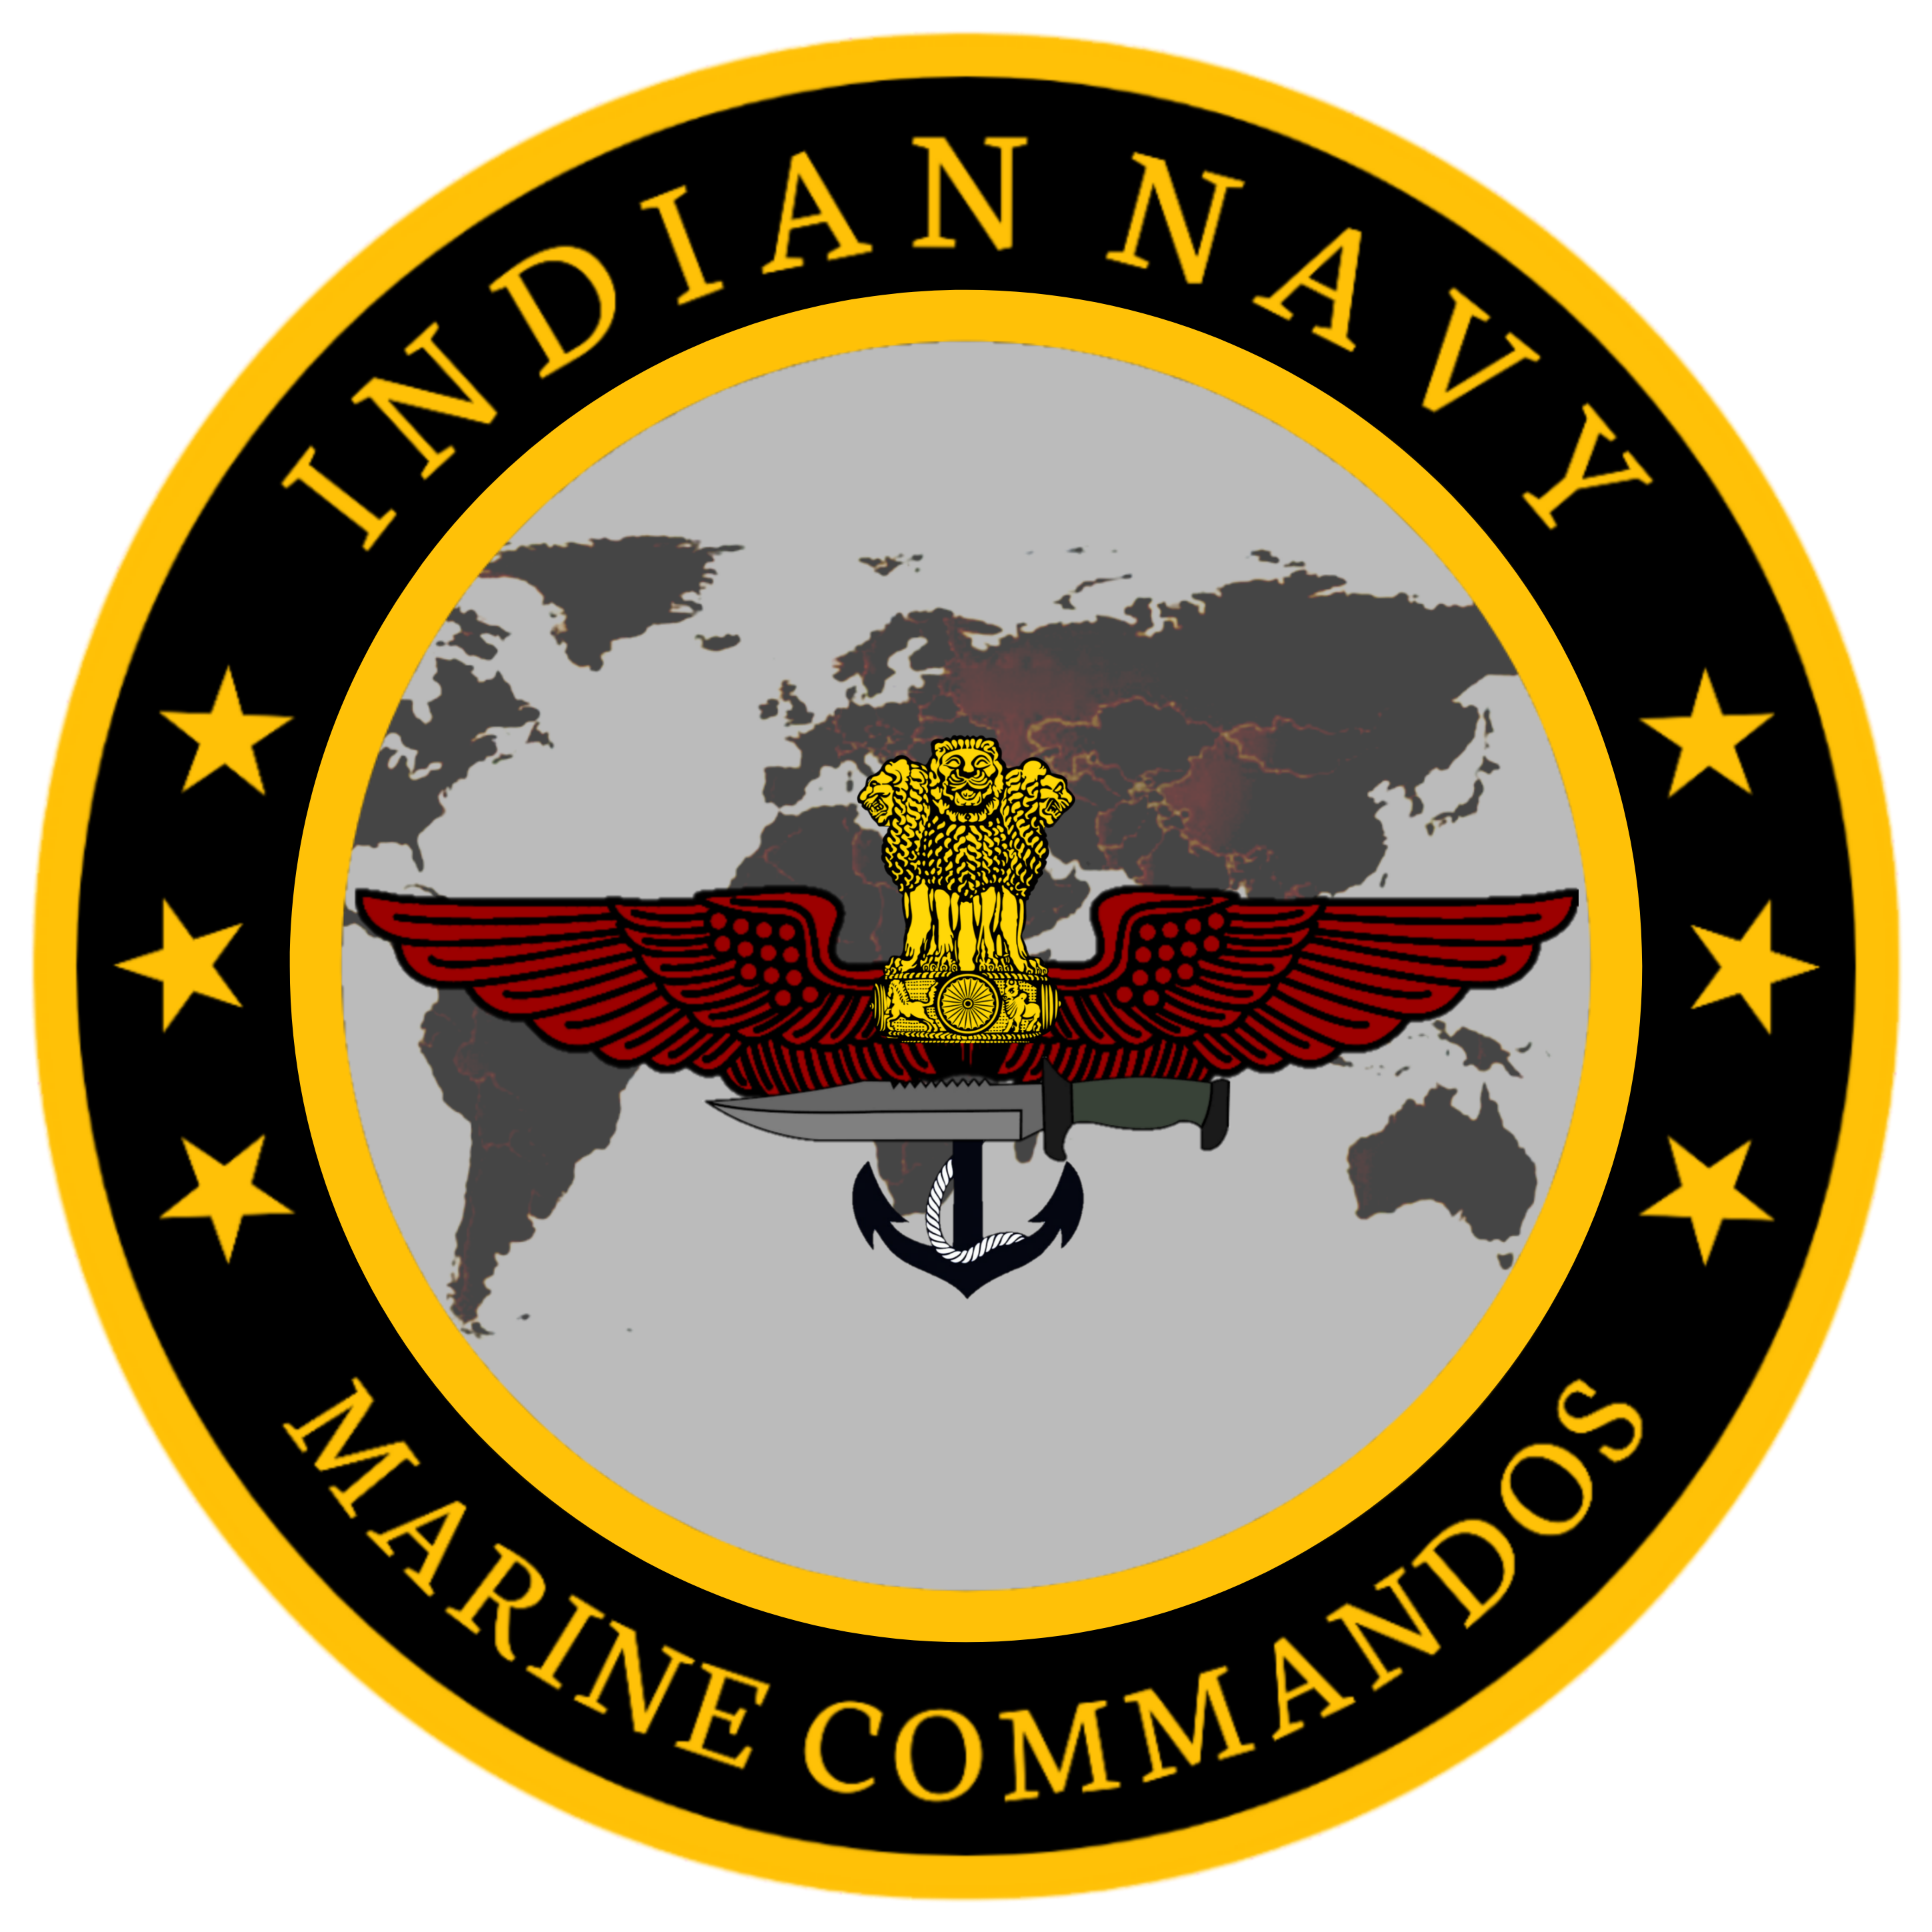 Indian Naval Academy - Wikipedia